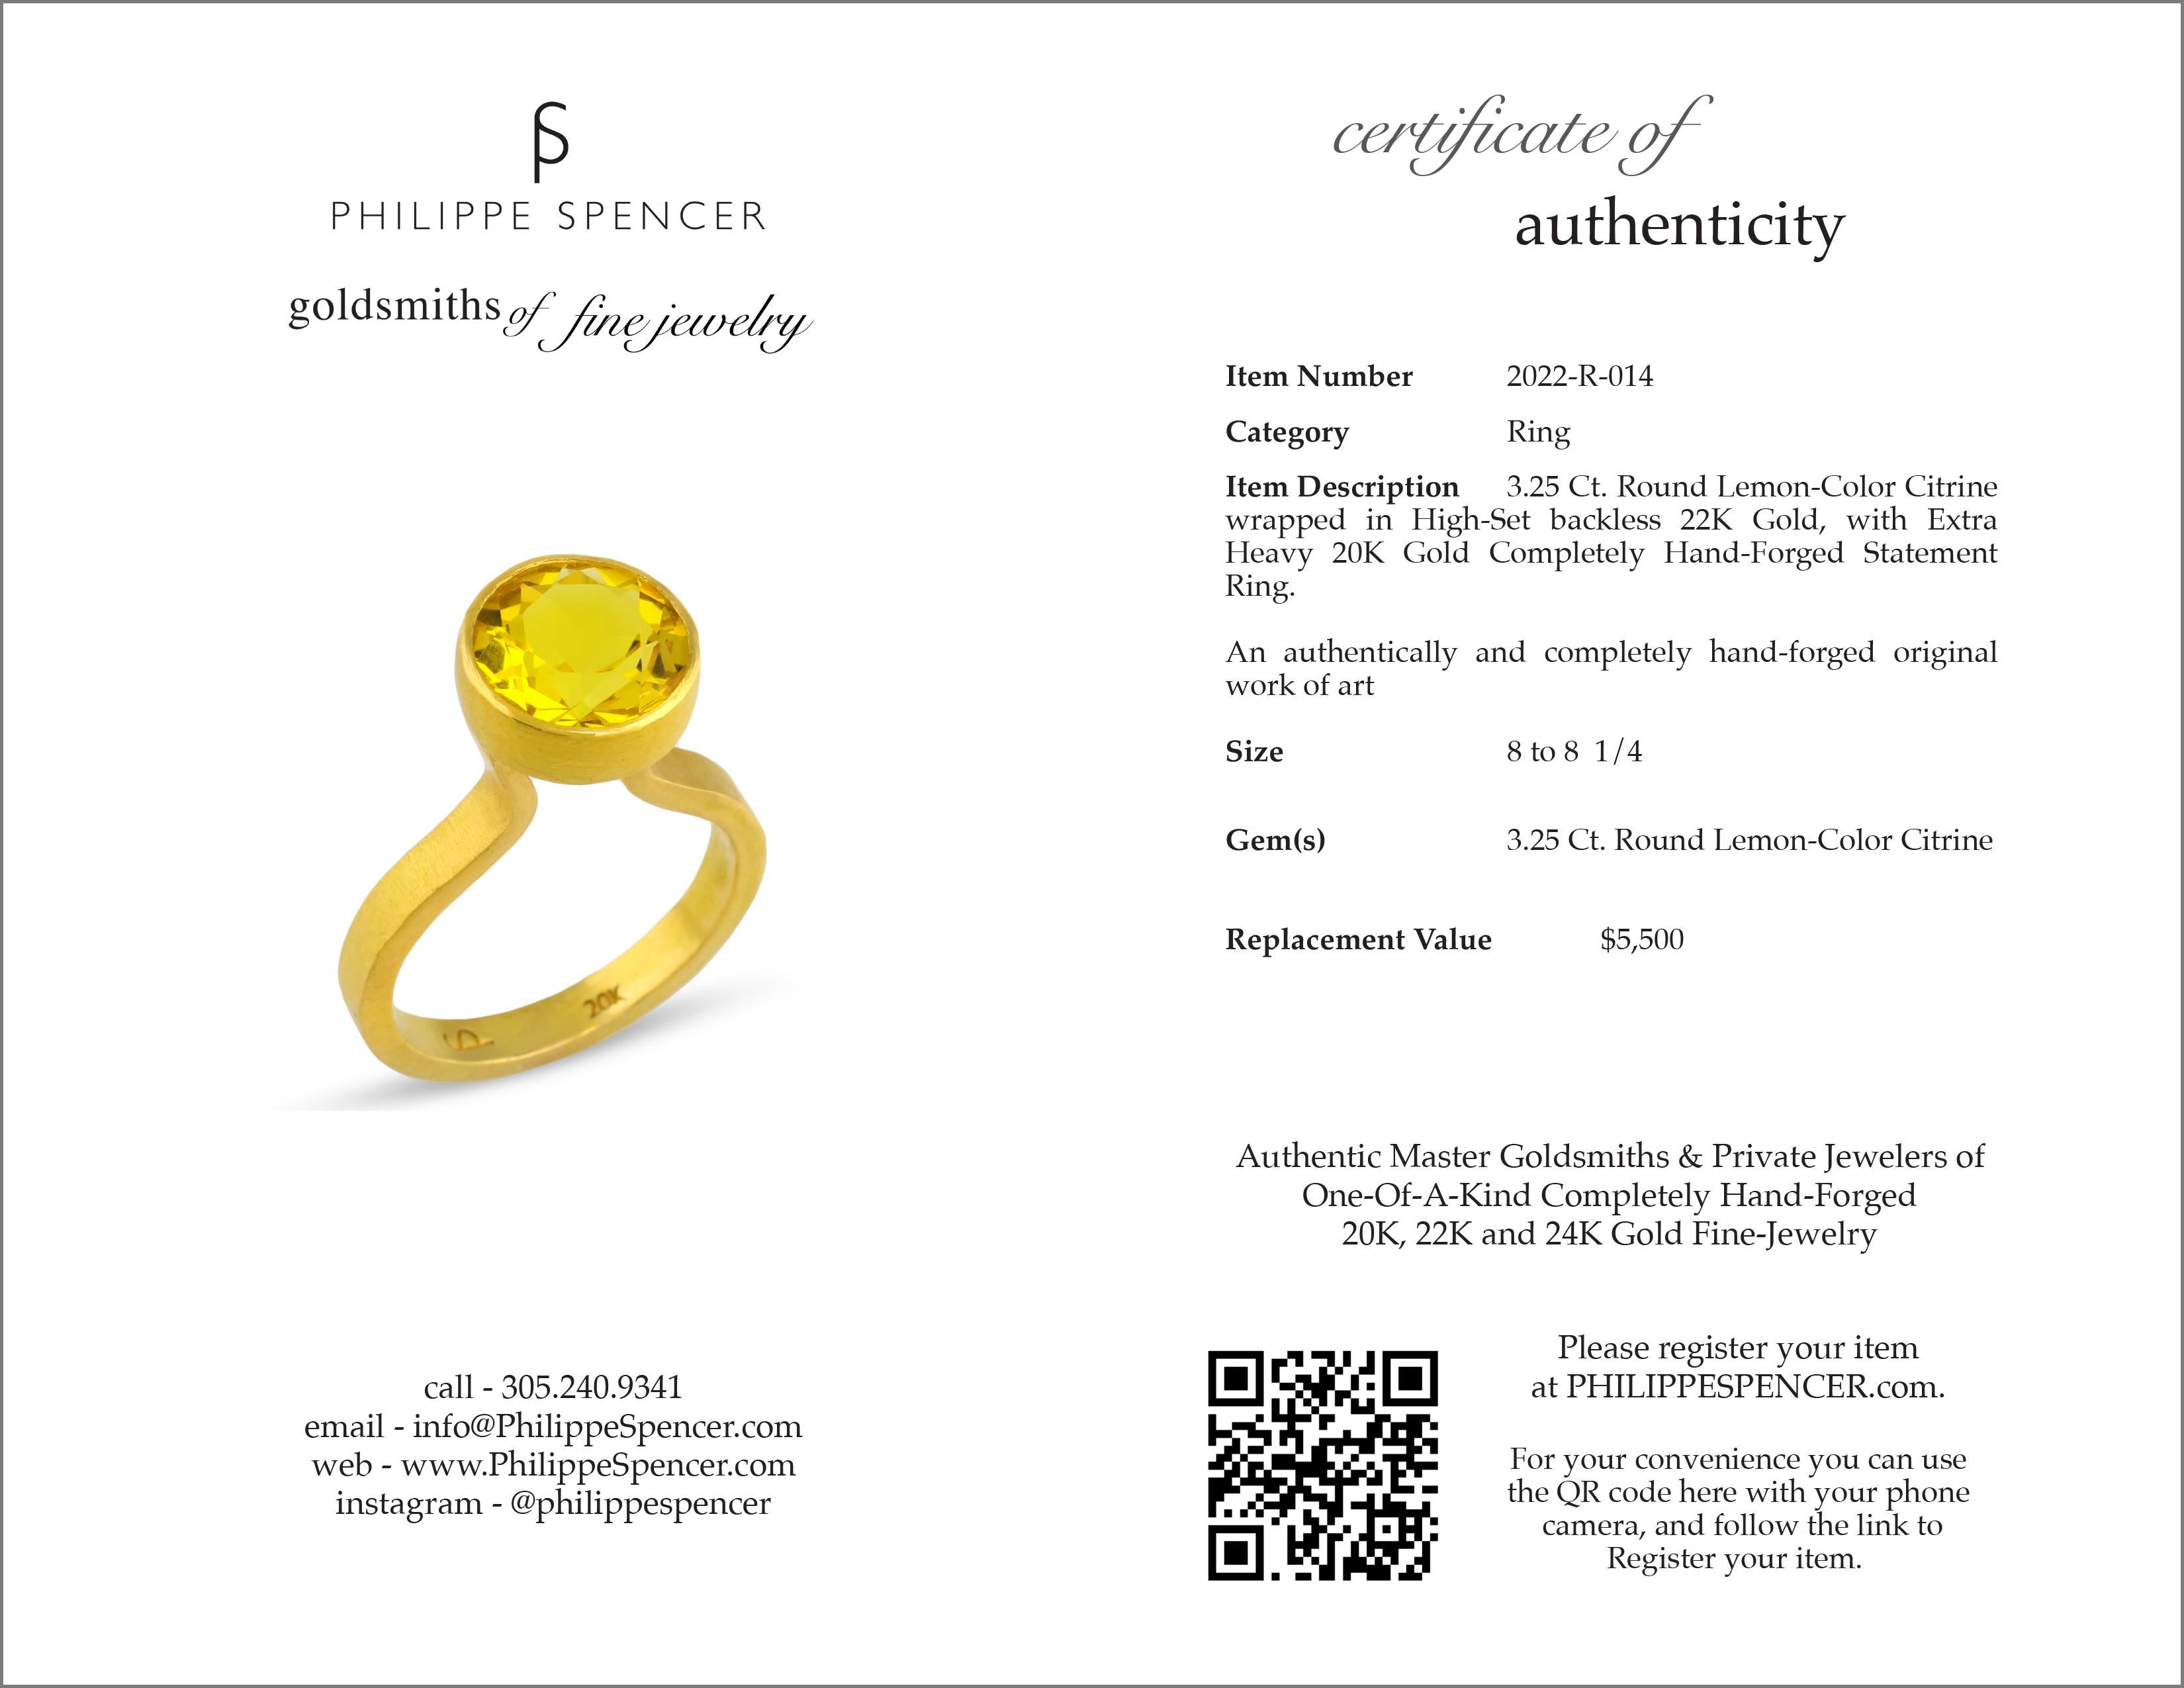 Round Cut PHILIPPE SPENCER 3.25 Ct. Lemon Color Citrine in 22K and 20K Gold Statement Ring For Sale